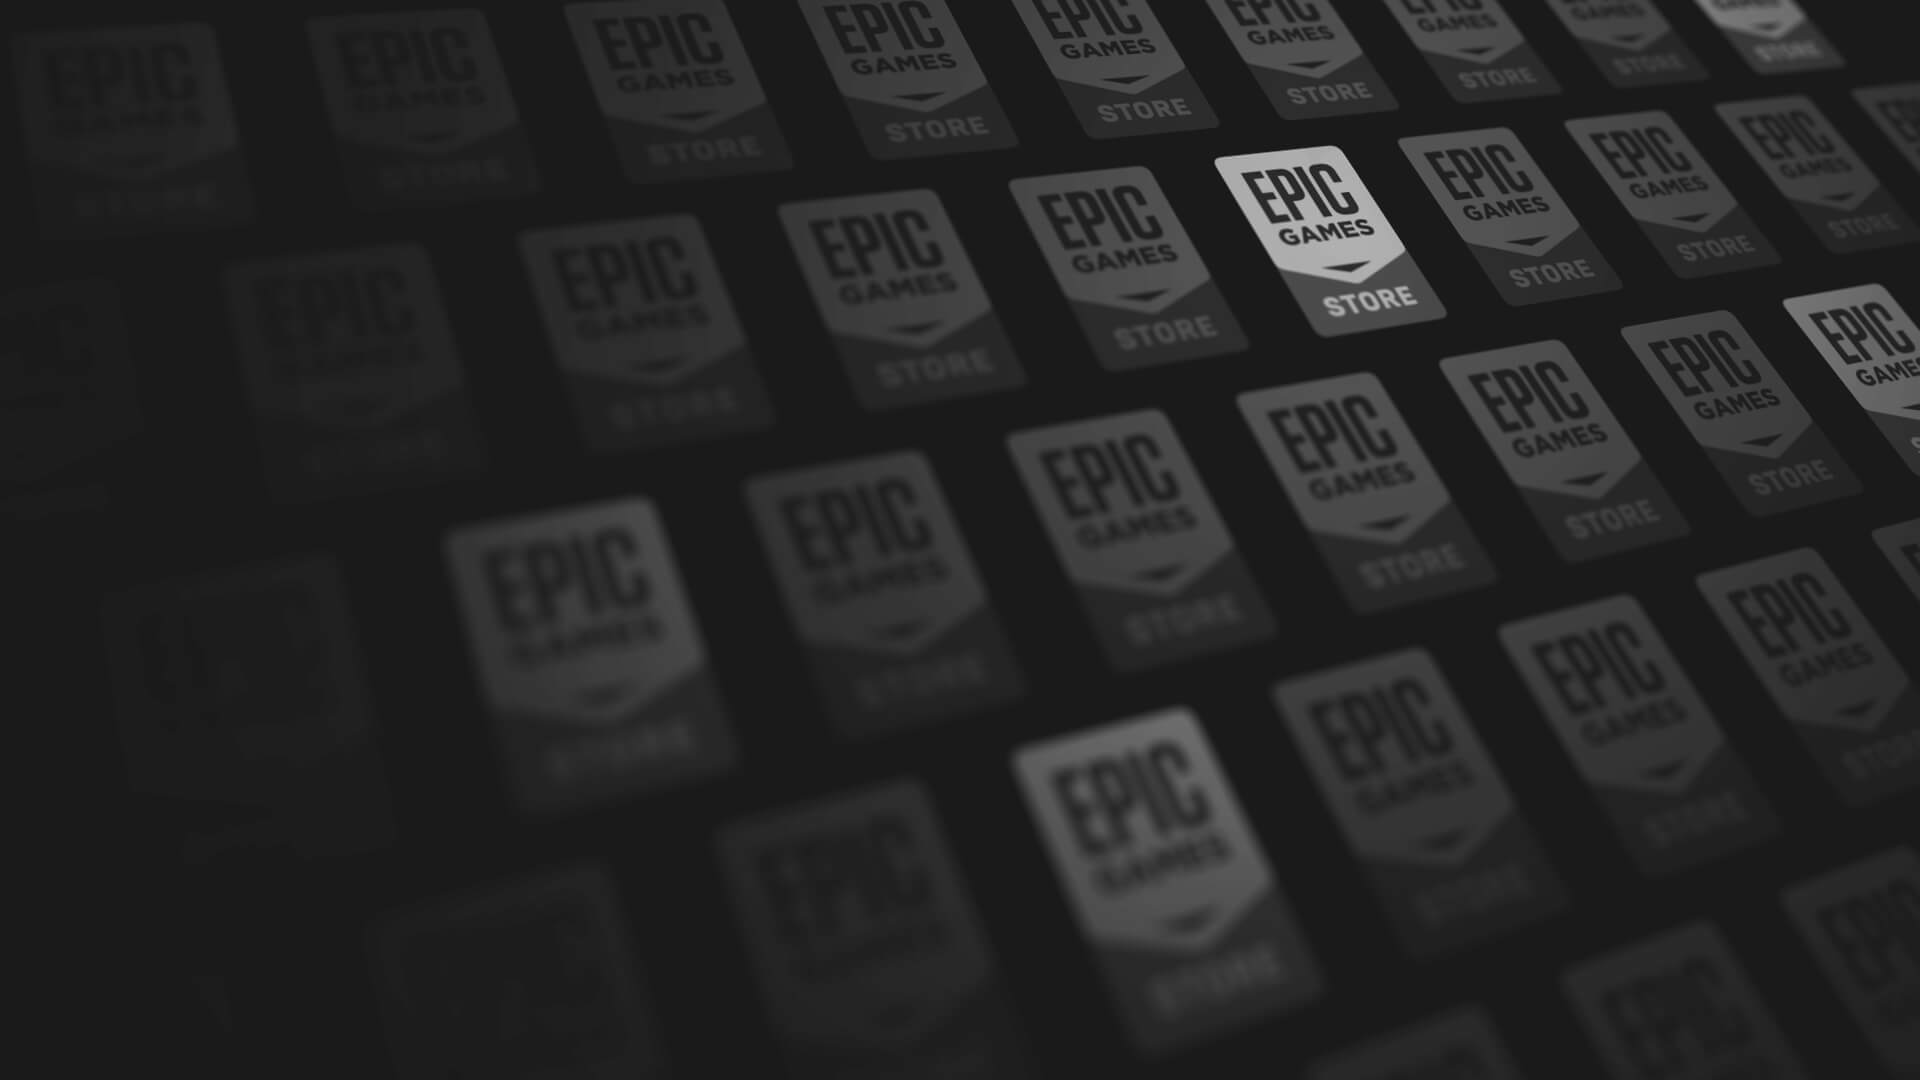 Image for Epic welcomes blockchain and NFT games as Steam bans them